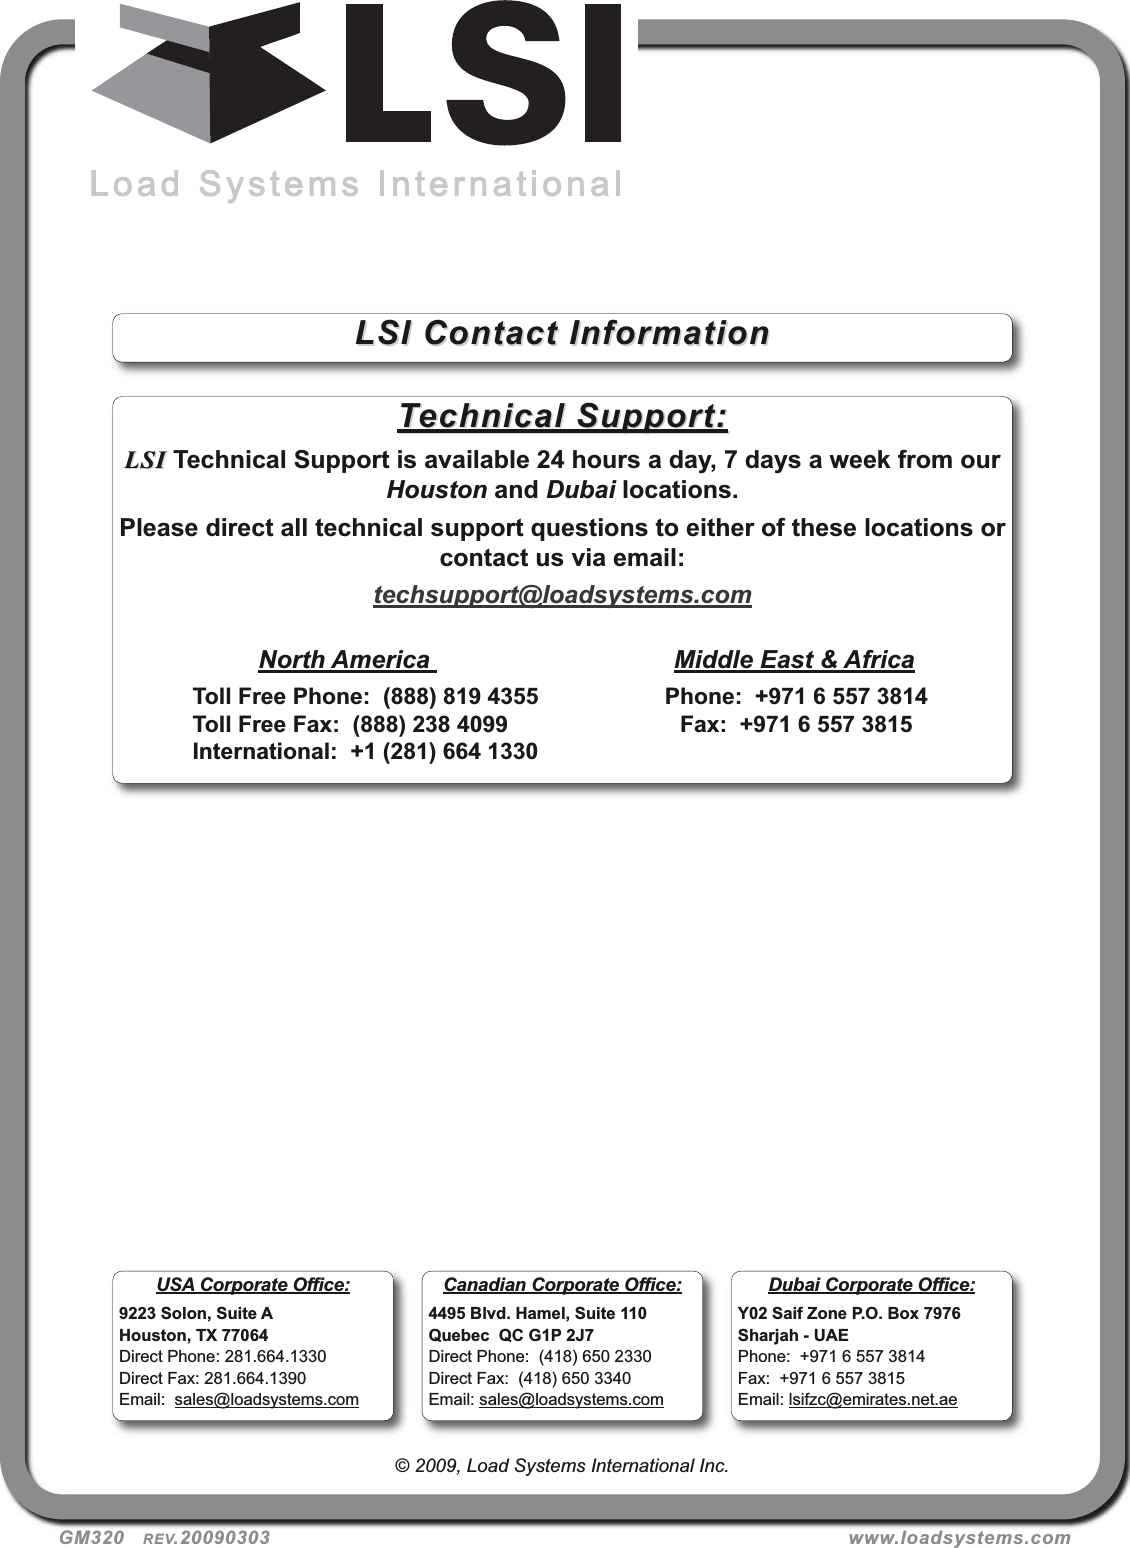 GM320   REV.20090303 www.loadsystems.com© 2009, Load Systems International Inc.Technical Support:Technical Support:LSILSI Technical Support is available 24 hours a day, 7 days a week from ourHouston and Dubai locations.Please direct all technical support questions to either of these locations orcontact us via email:techsupport@loadsystems.comNorth America  Middle East &amp; AfricaToll Free Phone:  (888) 819 4355 Phone:  +971 6 557 3814Toll Free Fax:  (888) 238 4099 Fax:  +971 6 557 3815International:  +1 (281) 664 1330LSI Contact InformationLSI Contact InformationUSA Corporate Office:9223 Solon, Suite AHouston, TX 77064Direct Phone: 281.664.1330Direct Fax: 281.664.1390Email:  sales@loadsystems.comDubai Corporate Office:Y02 Saif Zone P.O. Box 7976Sharjah - UAEPhone:  +971 6 557 3814Fax:  +971 6 557 3815Email: lsifzc@emirates.net.aeCanadian Corporate Office:4495 Blvd. Hamel, Suite 110Quebec  QC G1P 2J7Direct Phone:  (418) 650 2330Direct Fax:  (418) 650 3340Email: sales@loadsystems.com